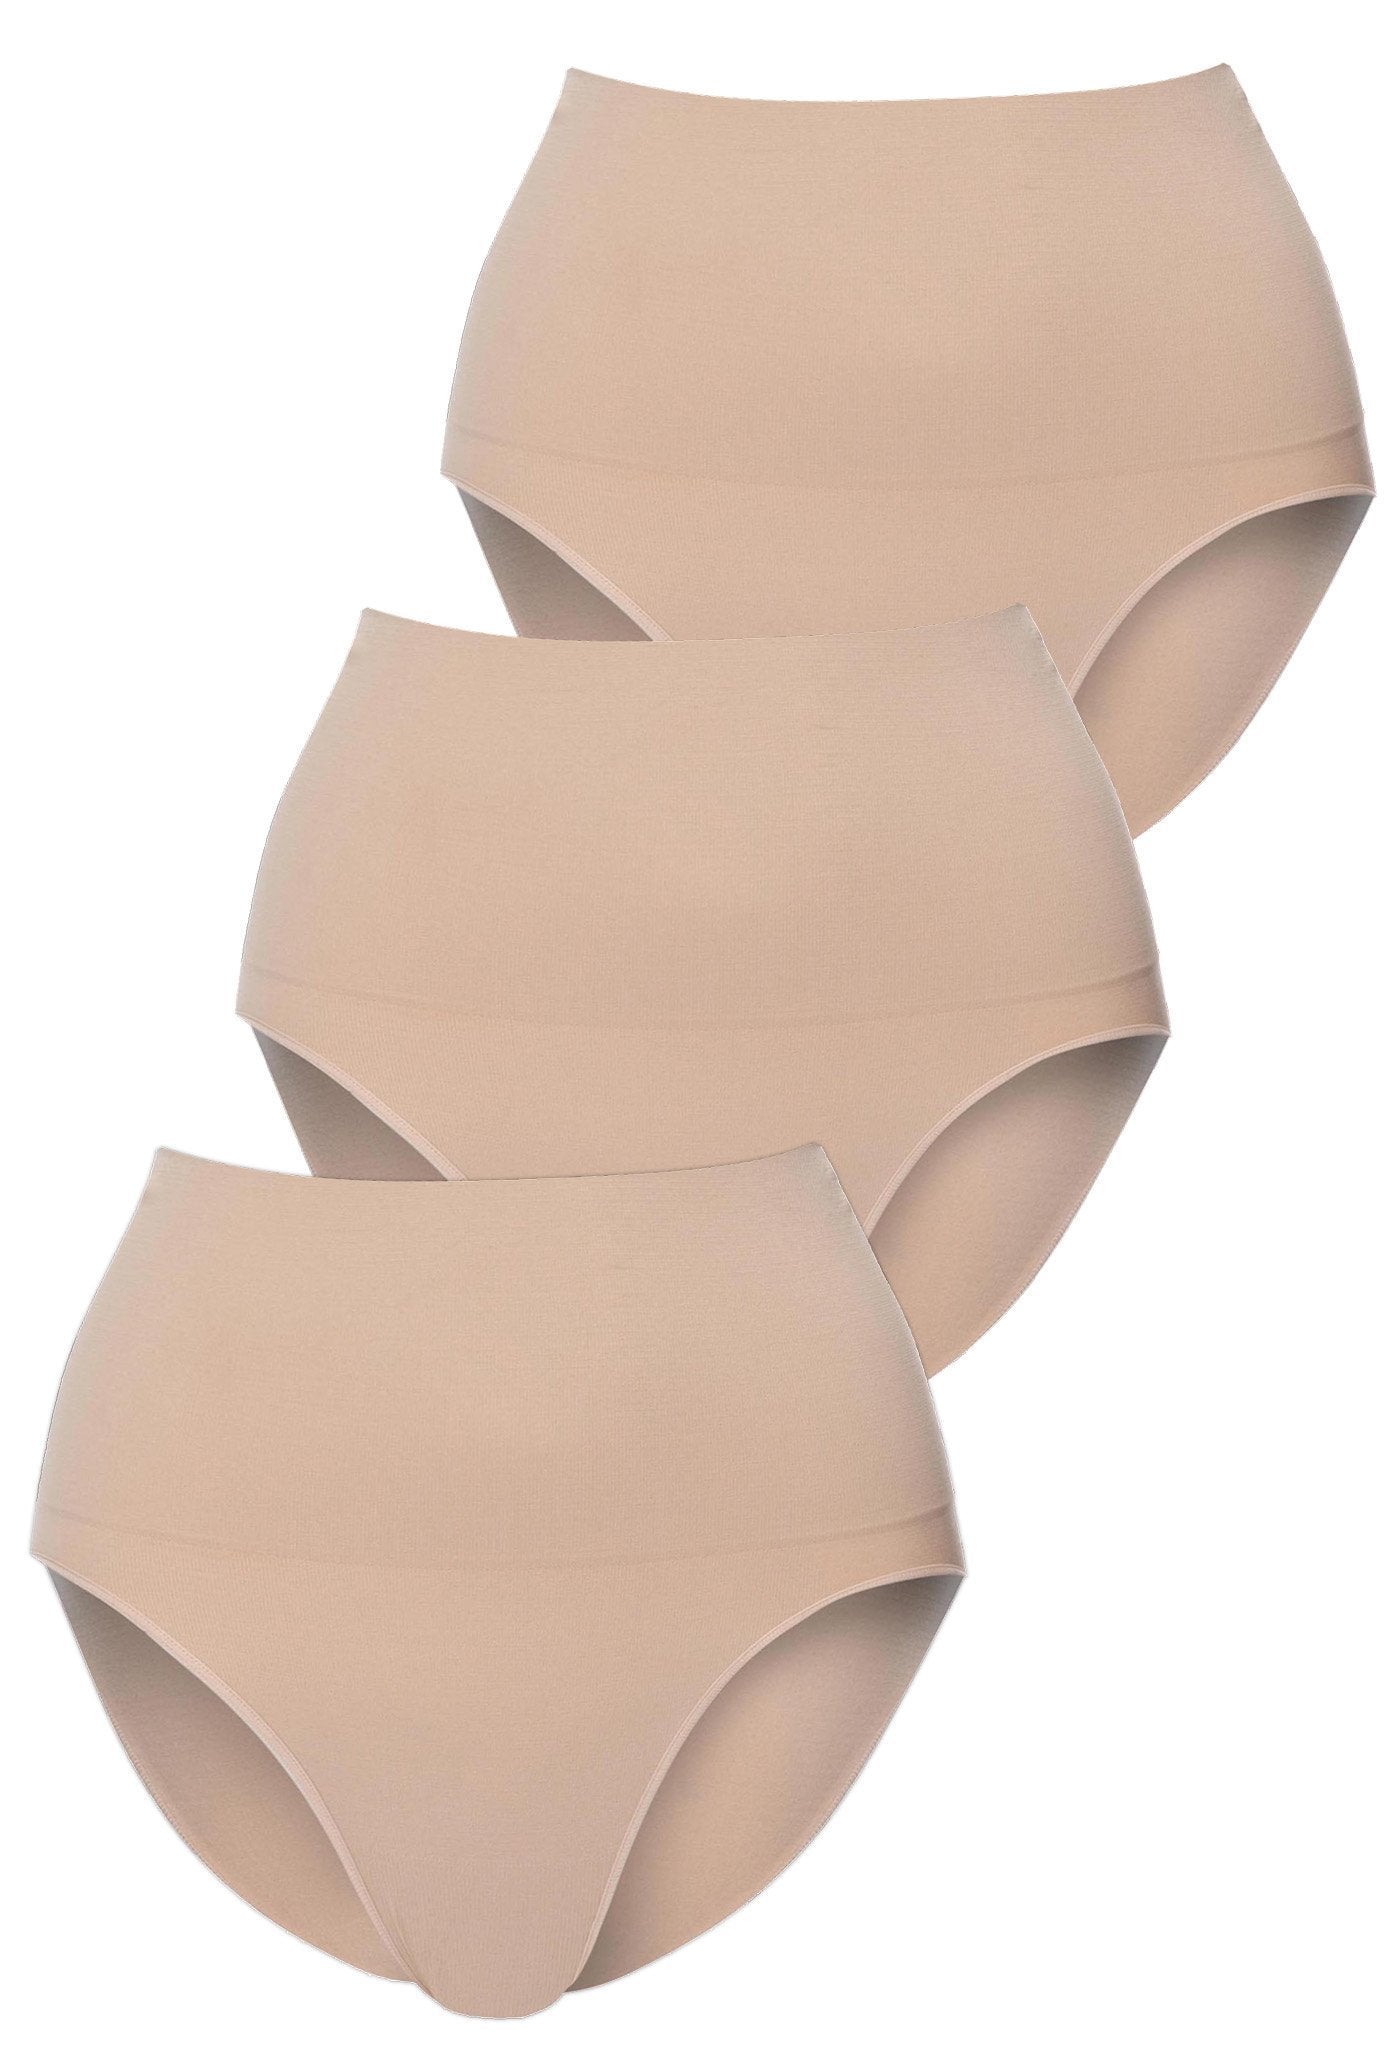 Power Shaping Brief 3pk - Flattens Lower Belly, Comfy Everyday